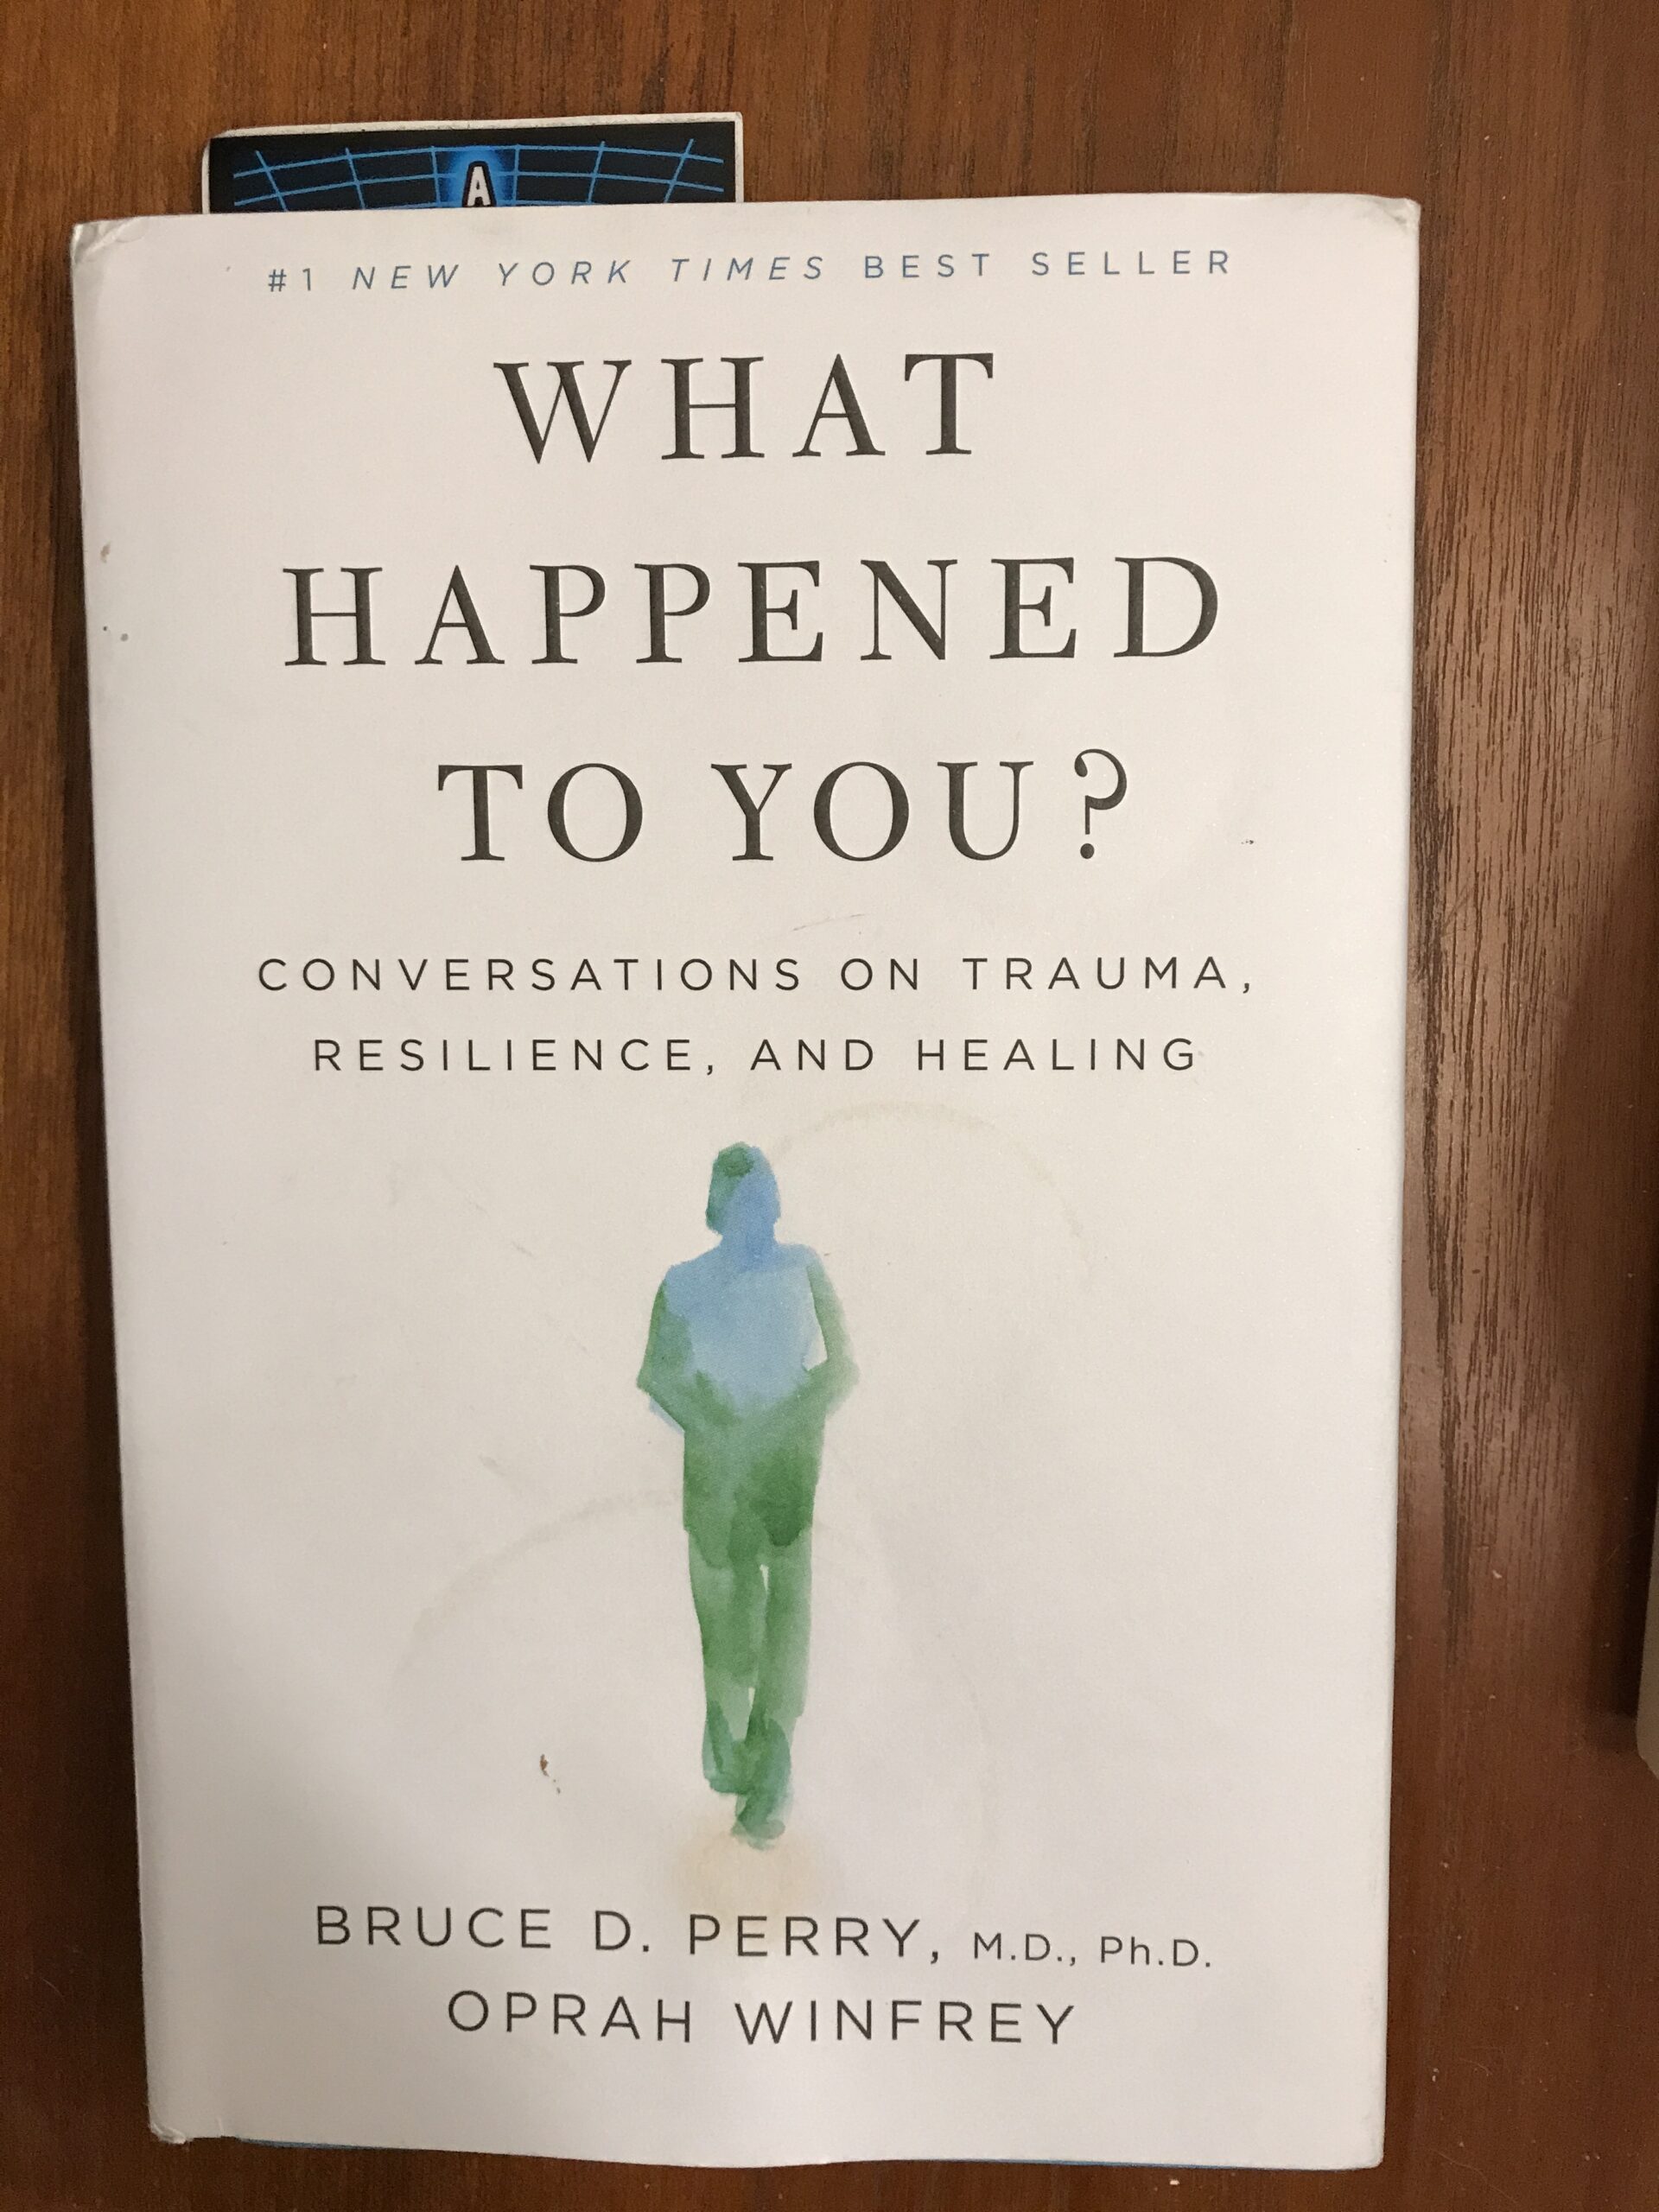 The book, What Happened to You? by Dr Bruce Perry and Oprah Winfrey